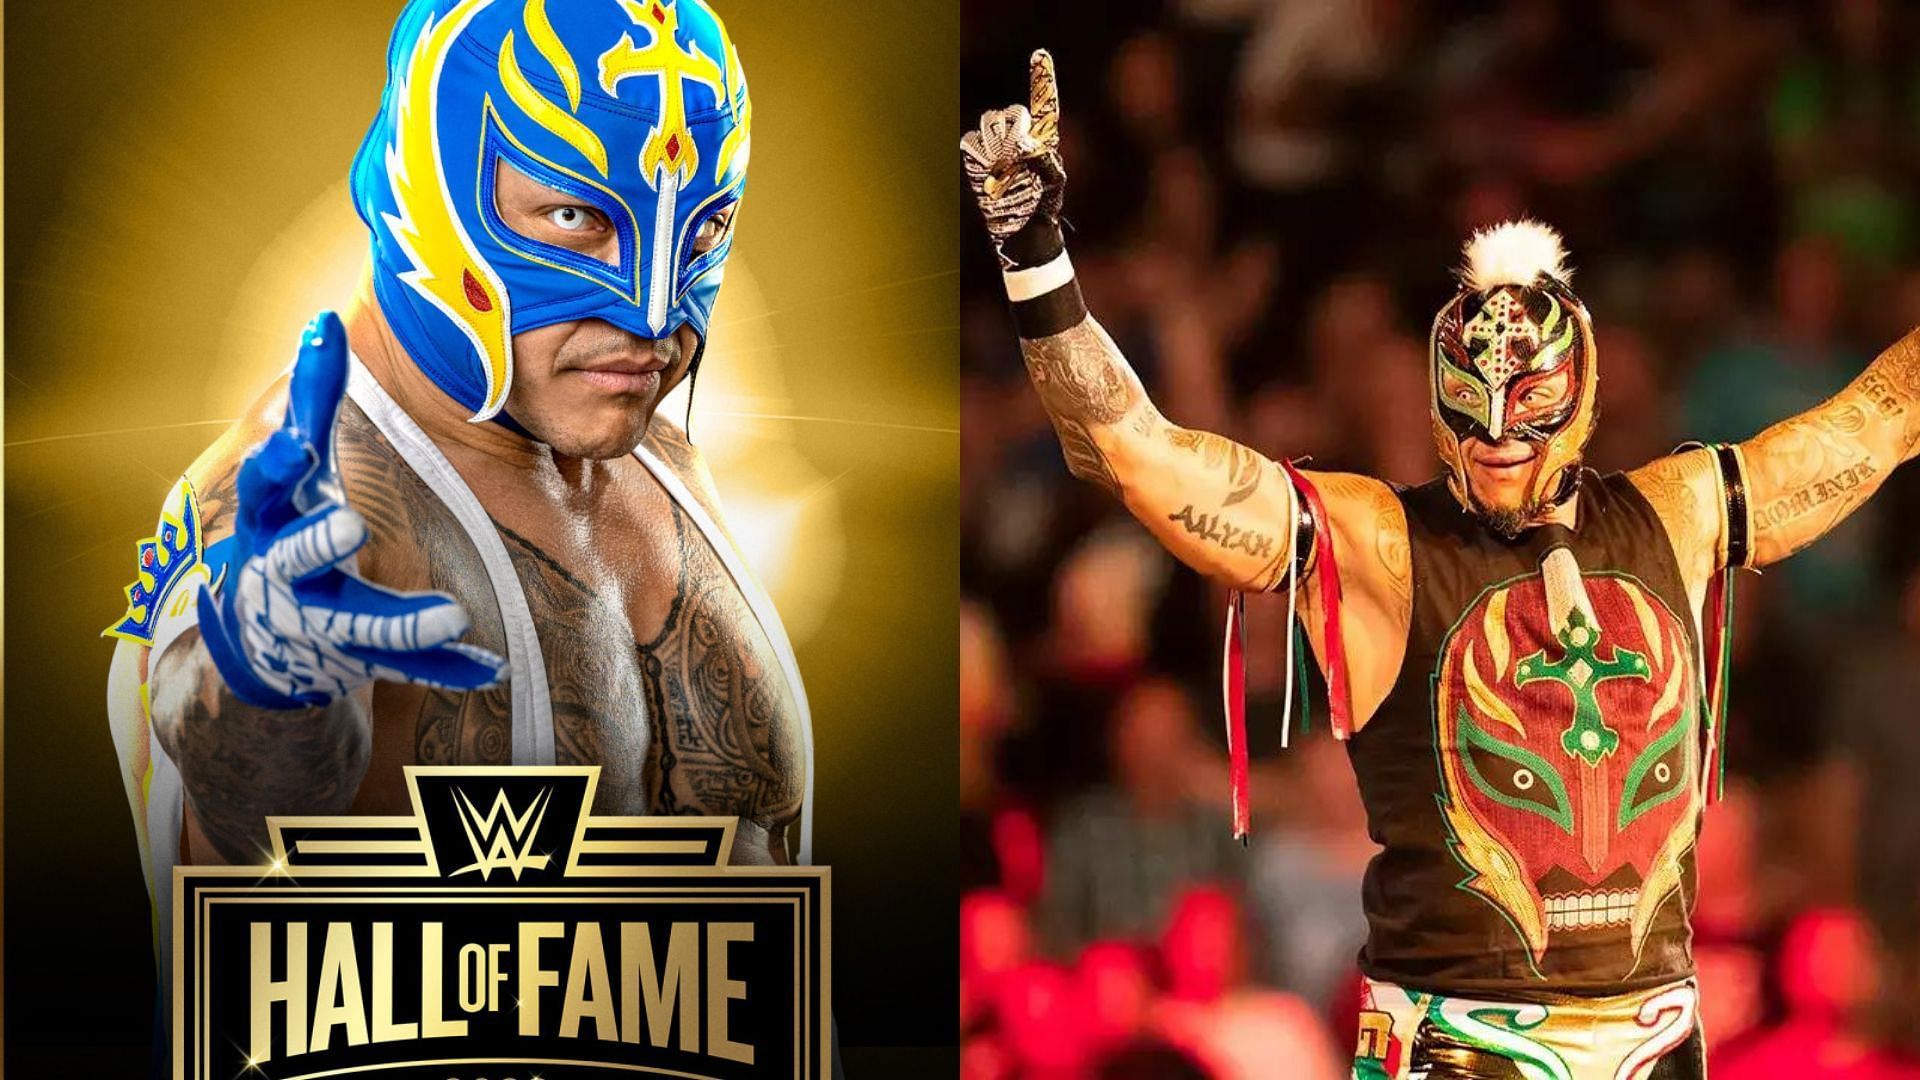 Rey Mysterio will be inducted into the WWE Hall of Fame